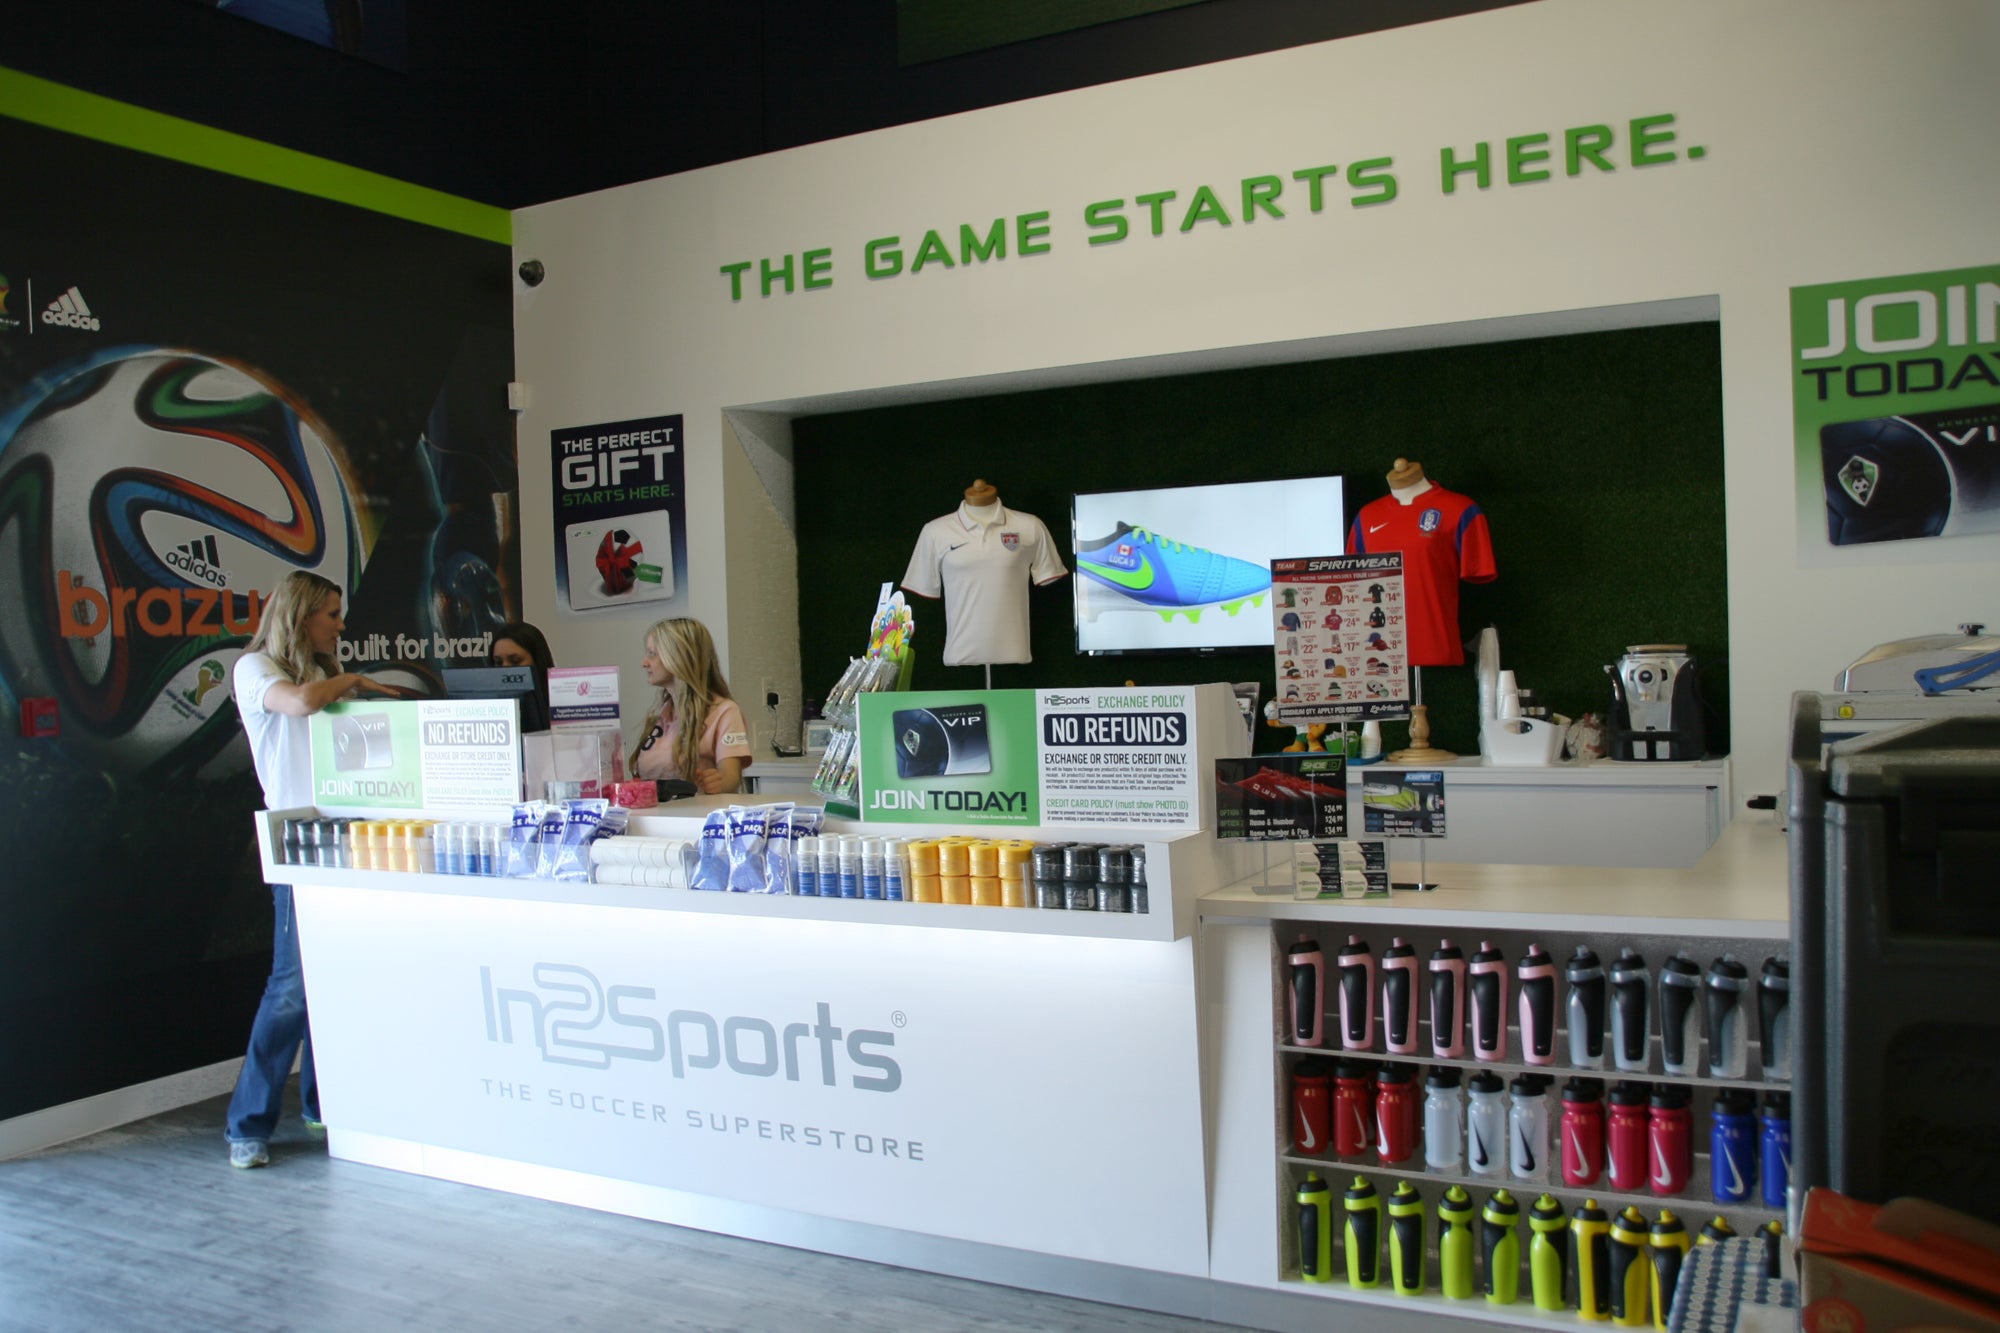 In2sports - The Soccer Superstore in London, Ontario, Canada